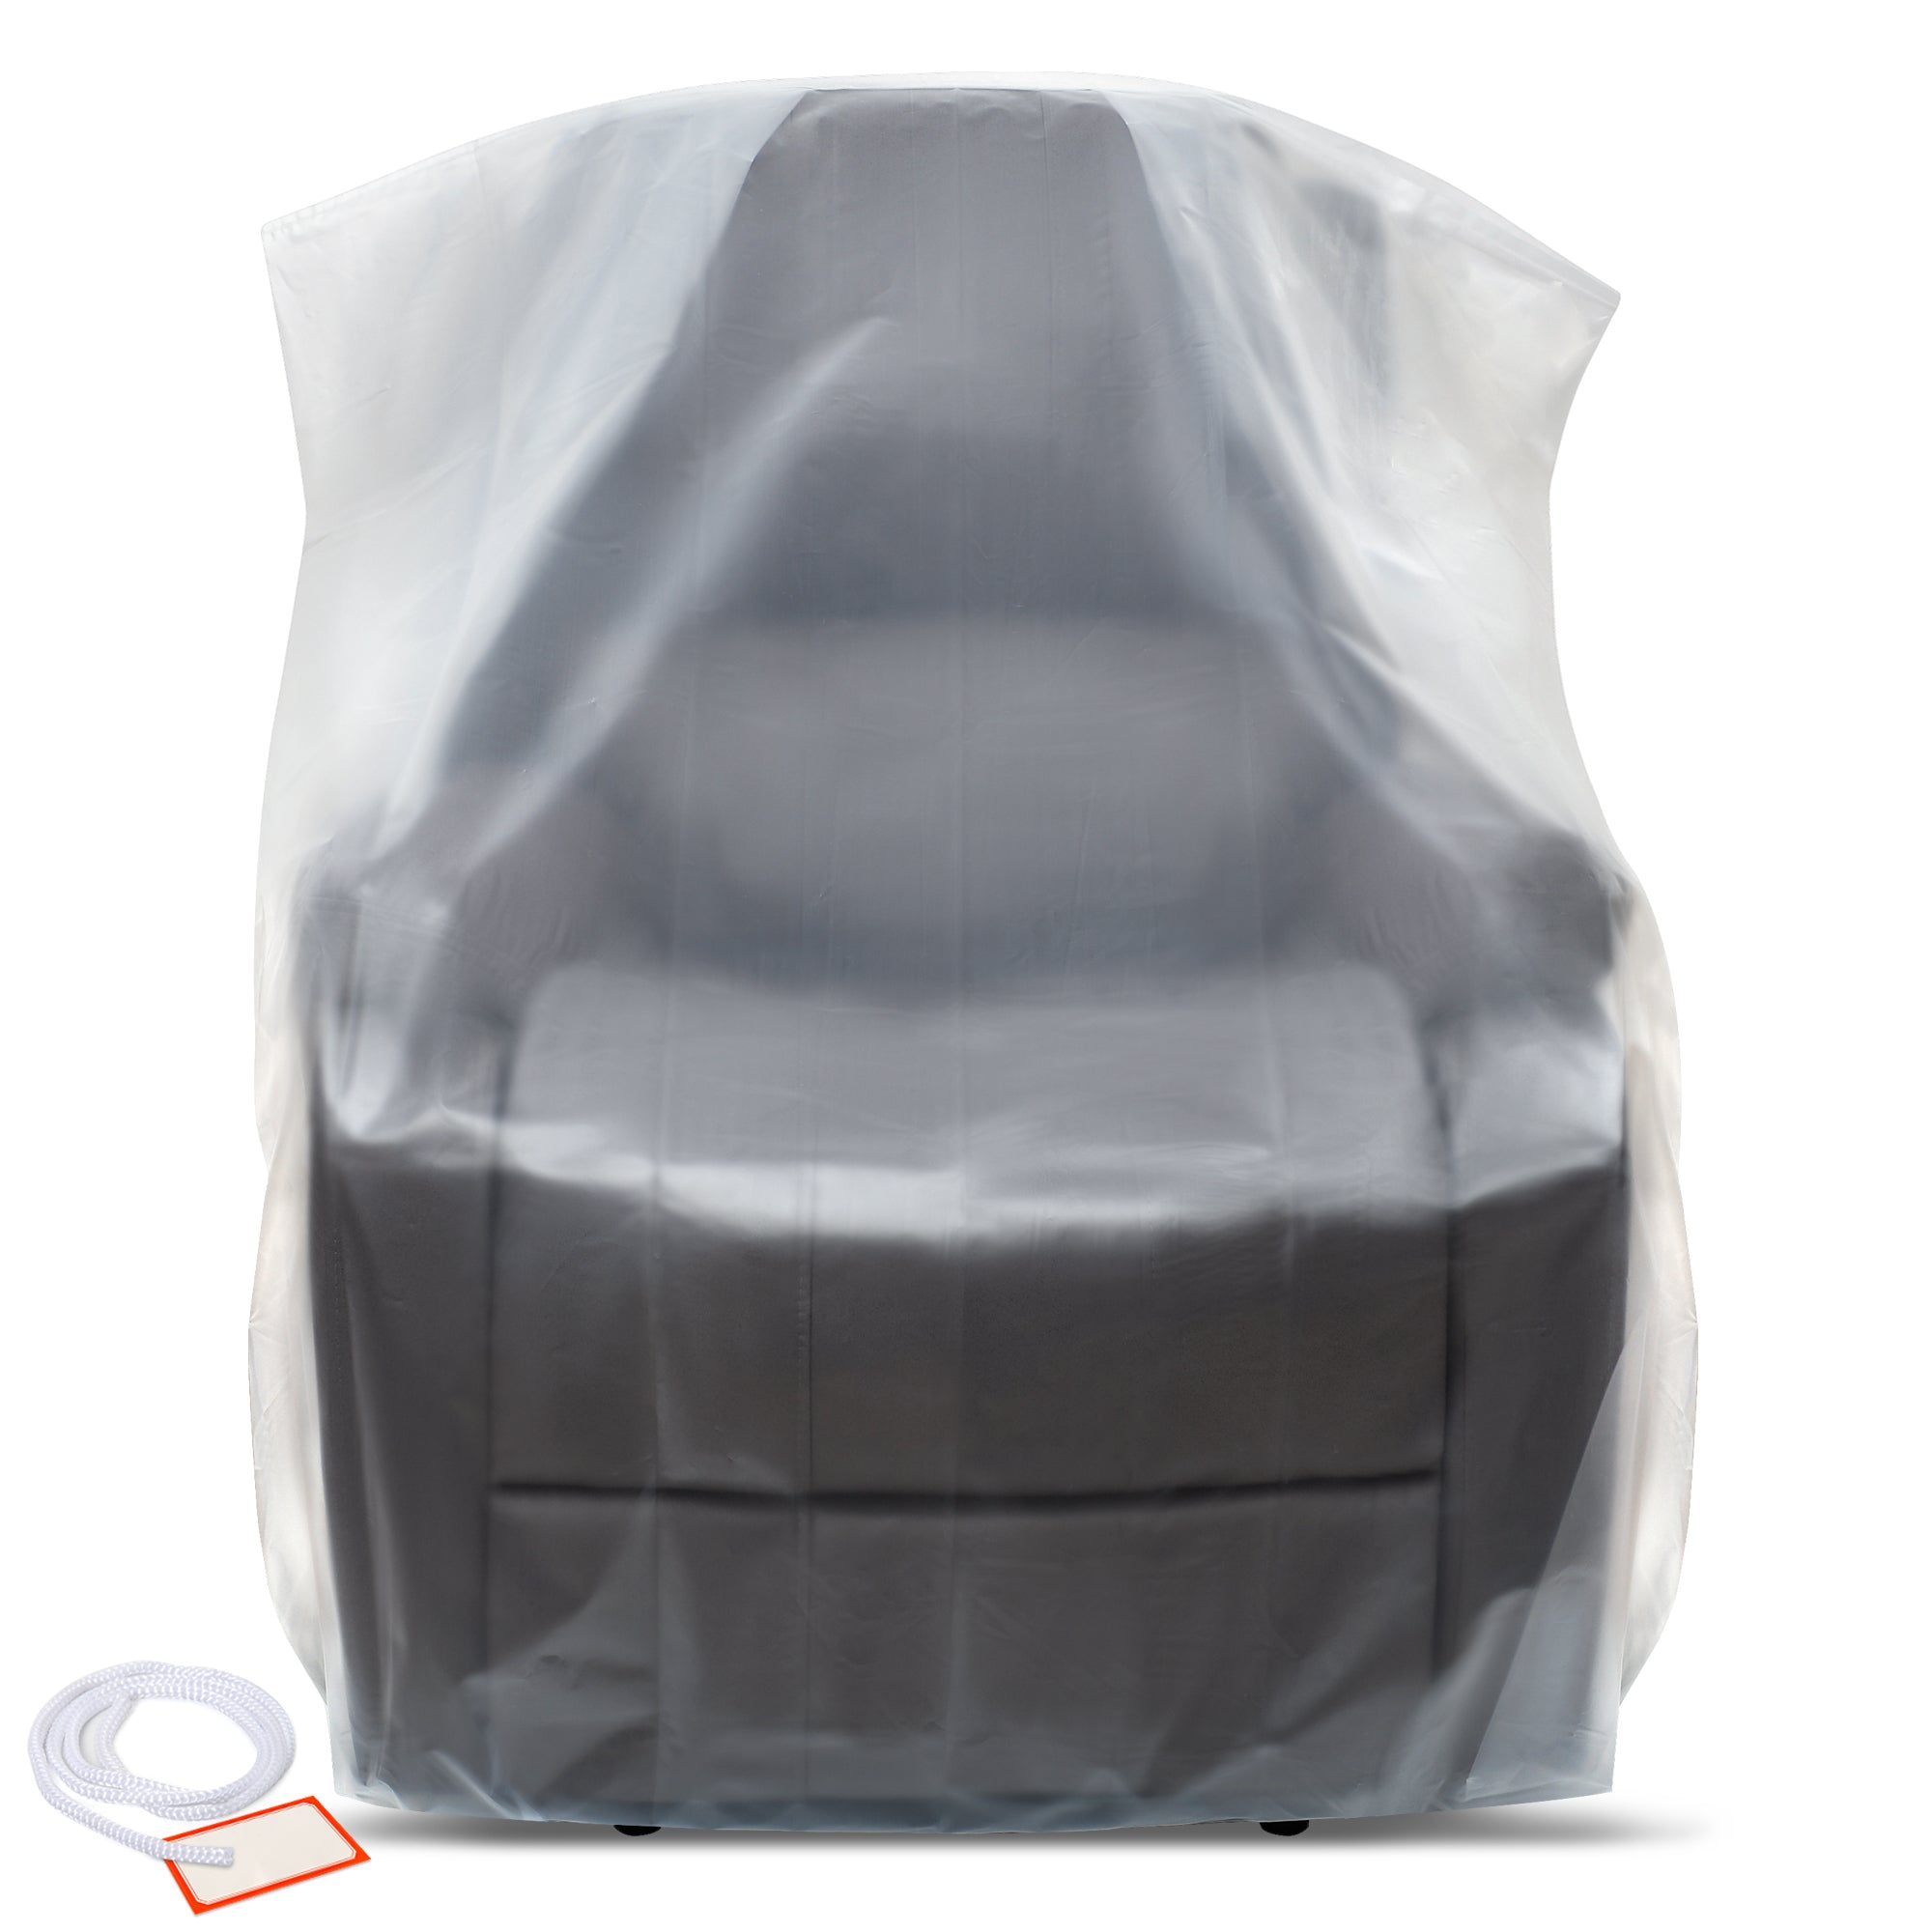 Plastic Furniture Covers for Moving Storage - Heavy-Duty Plastic Chair Cover Protectors, Waterproof & Dustproof Clear Moving Bags for Armchair or Recliner - Extra Large Bag Open Size 64 x 42 x 34 Inch